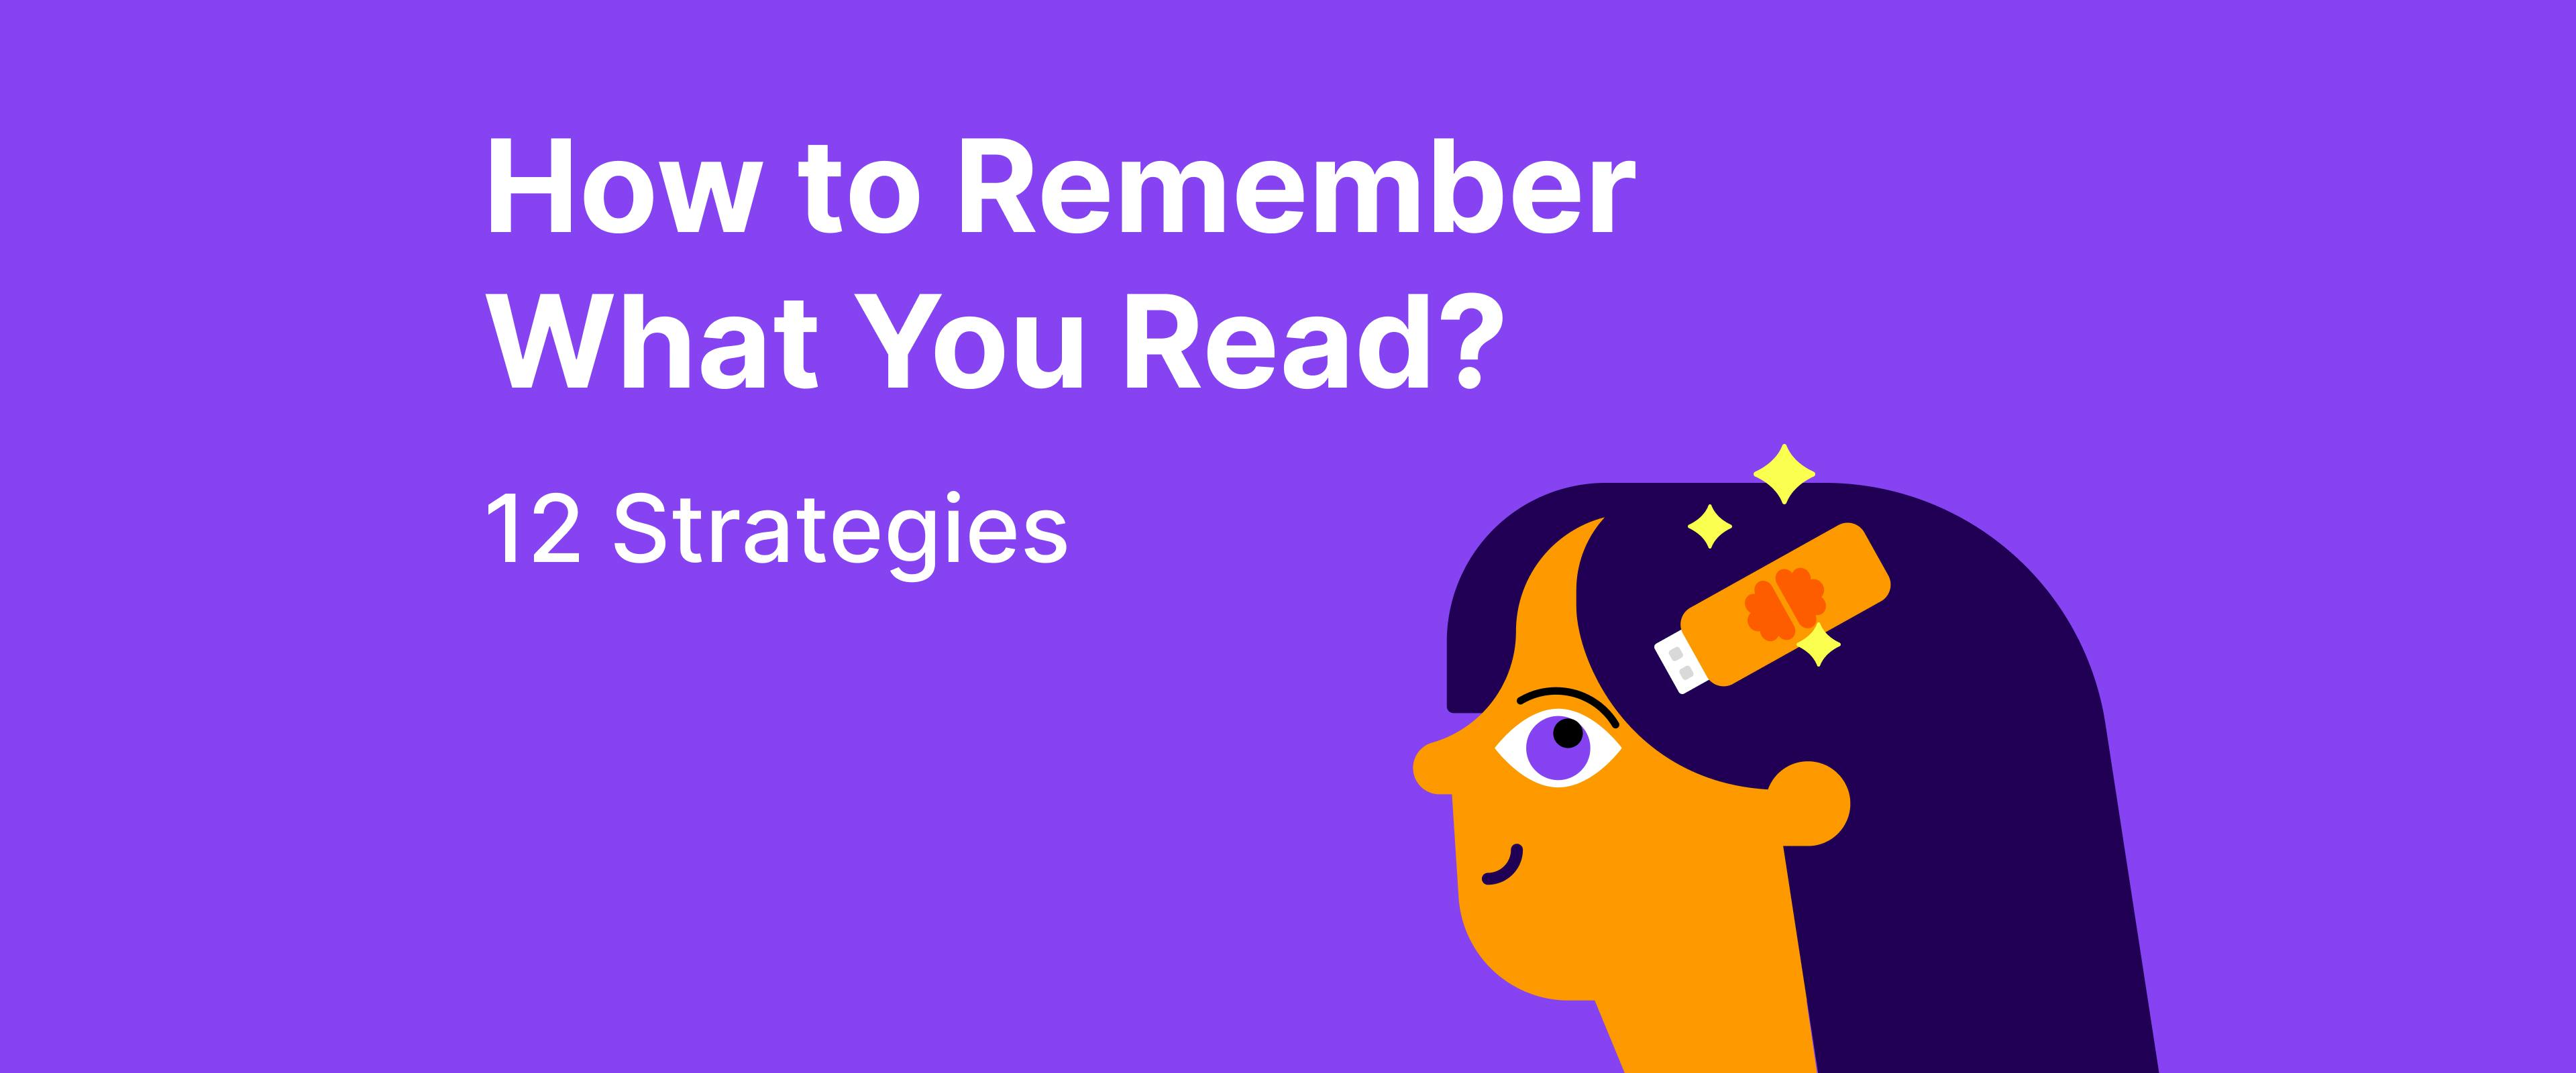 Tips on How to Remember What You Read